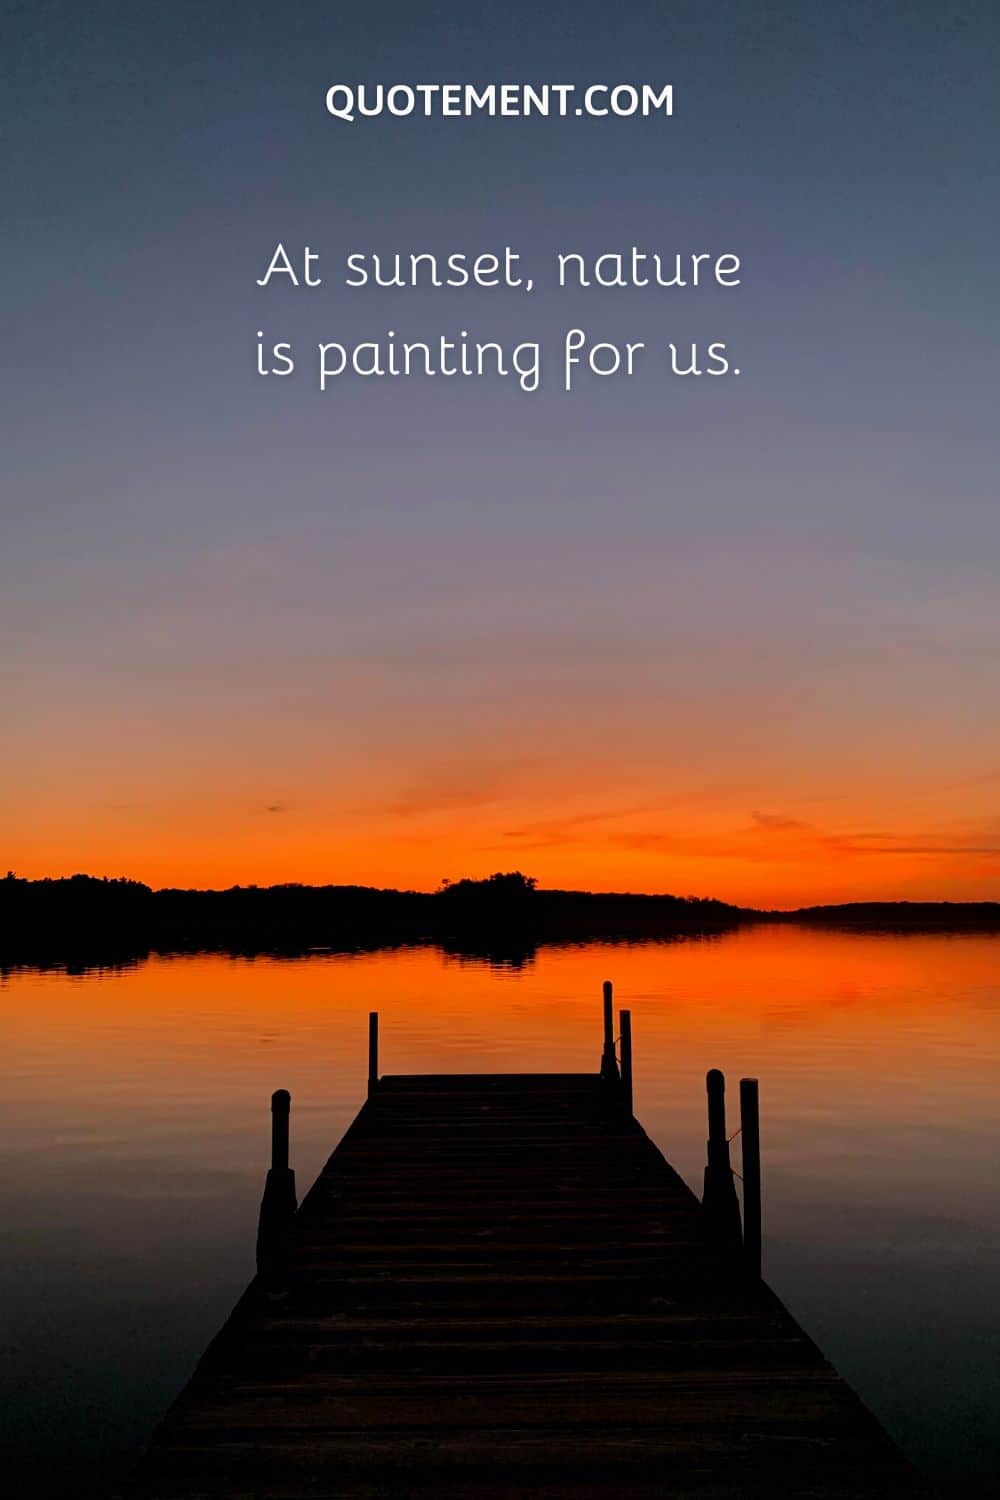 At sunset, nature is painting for us.